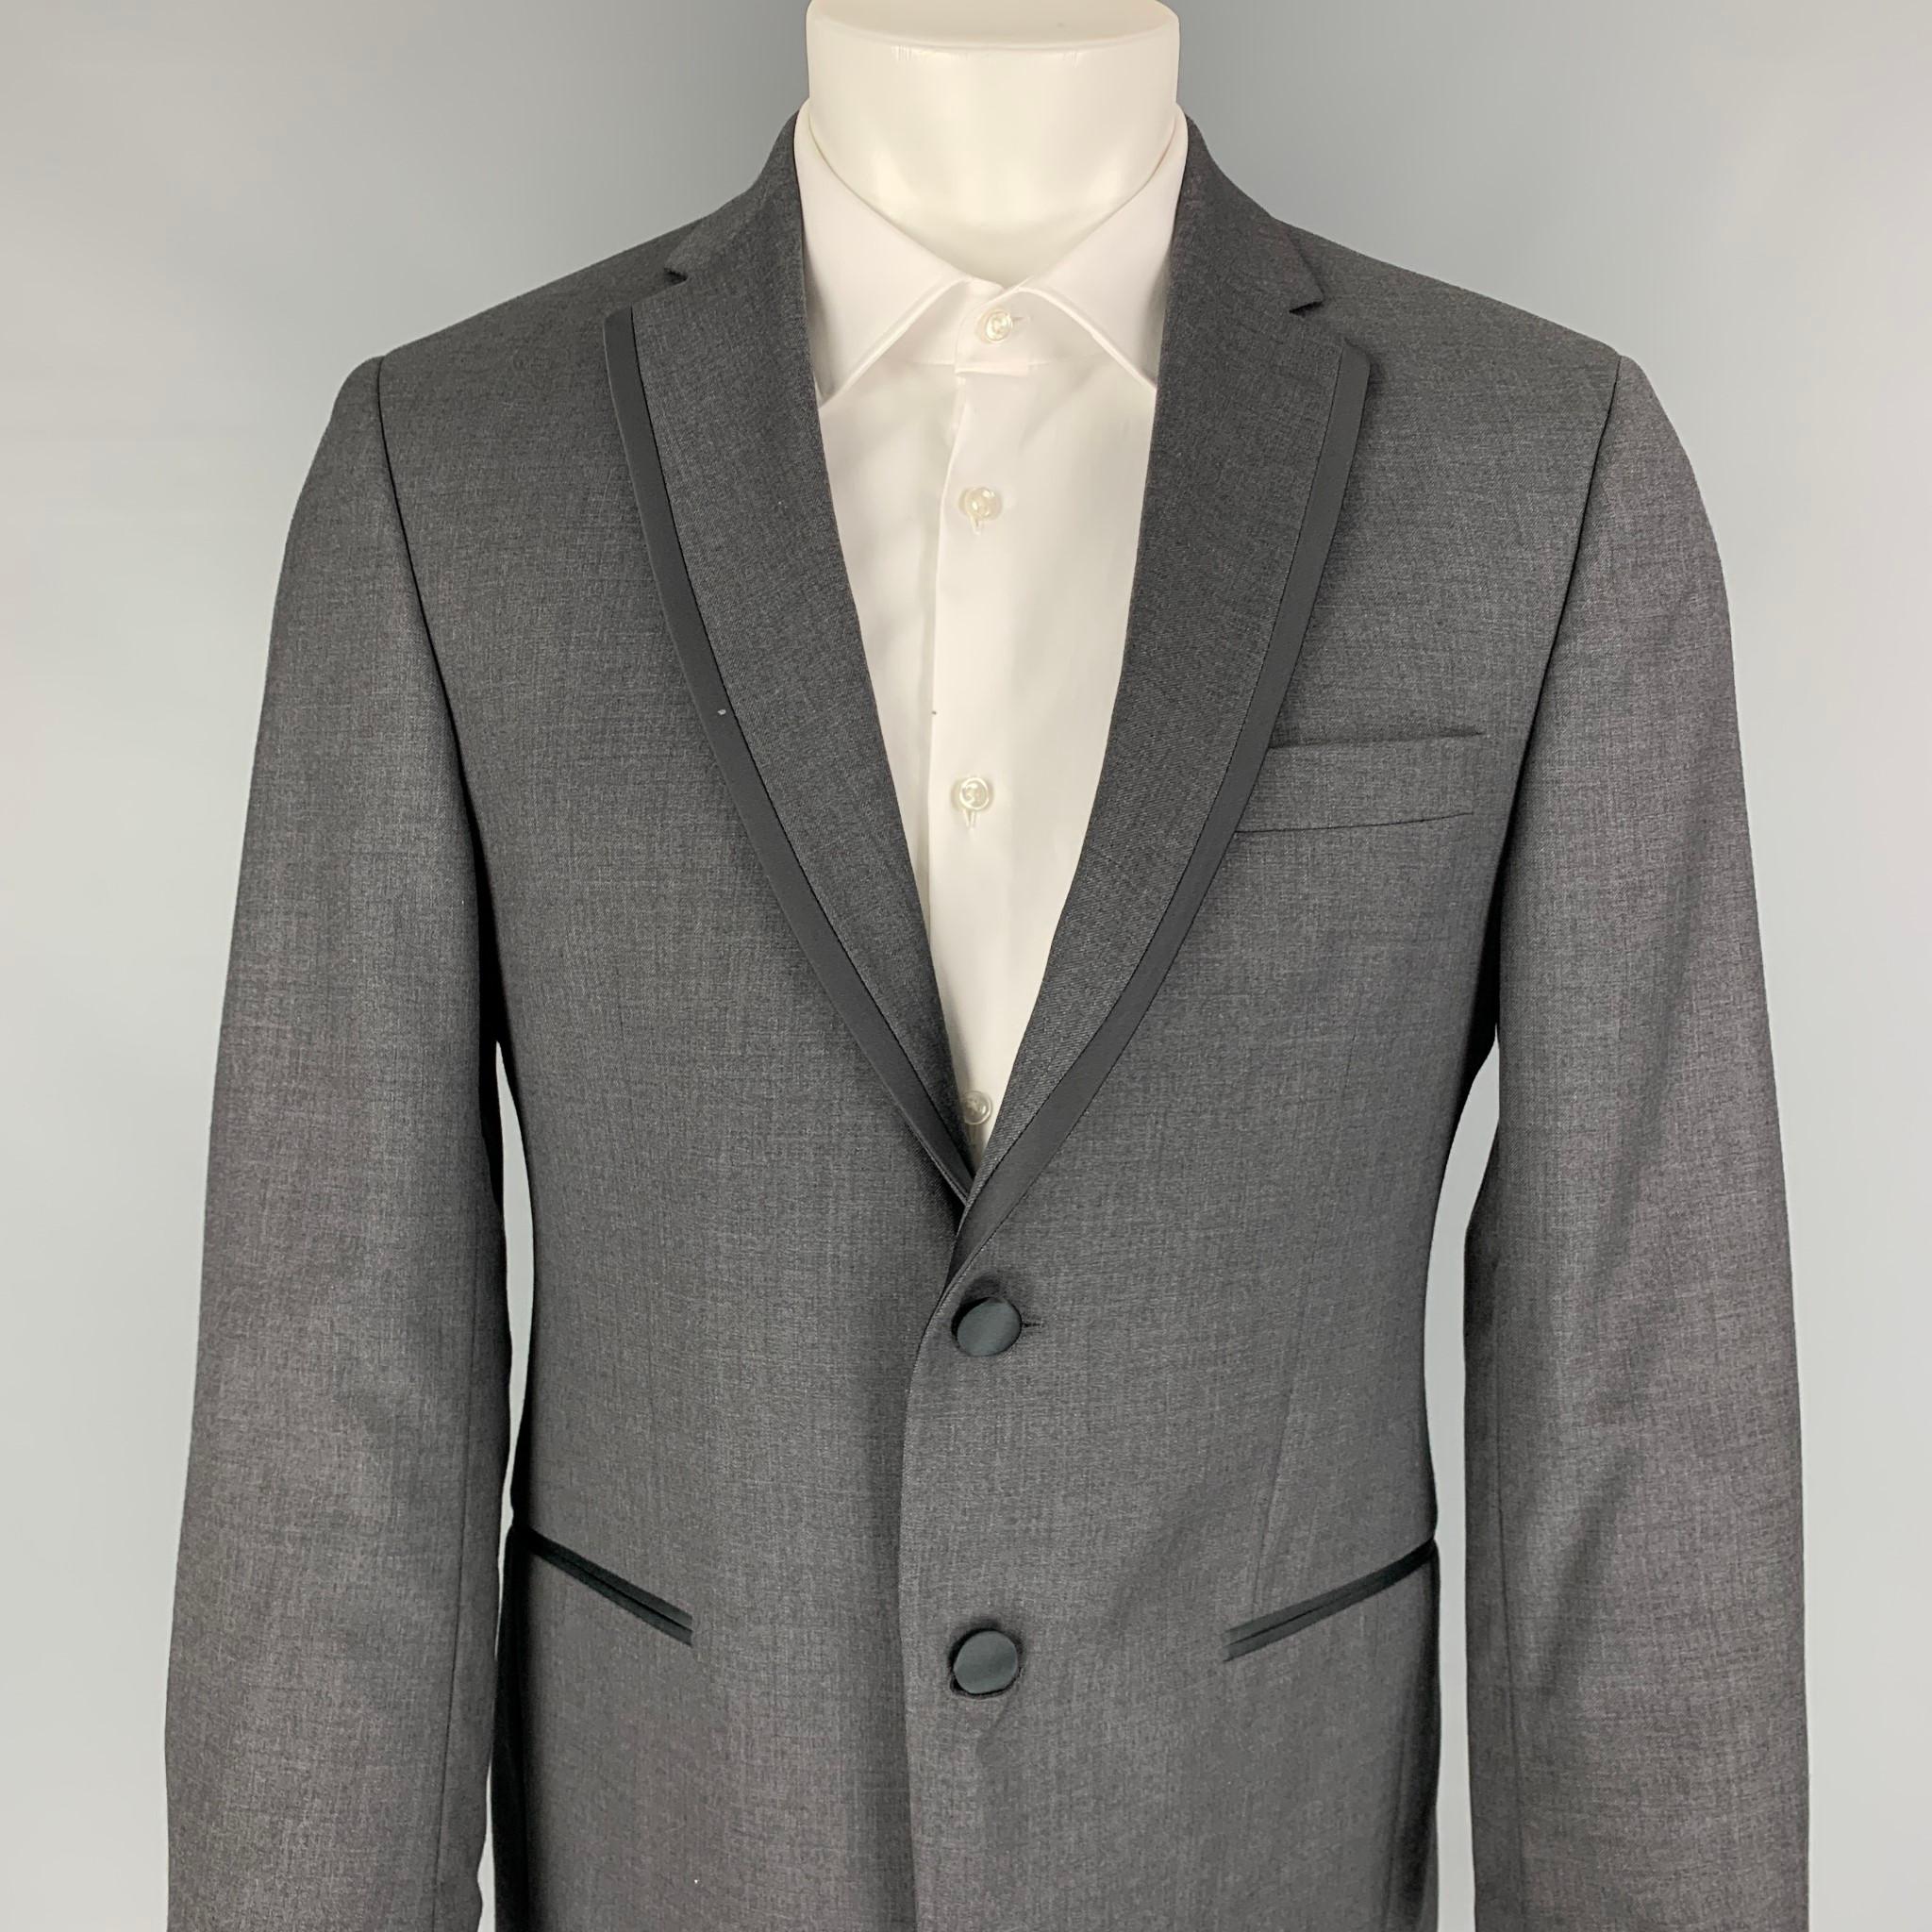 BLACK by VERA WANG sport coat comes in a grey & black wool with a full liner featuring a notch lapel, satin trim, double back vent, slit pockets, and a double button closure. 

Excellent Pre-Owned Condition.
Marked: 38

Measurements:

Shoulder: 17.5